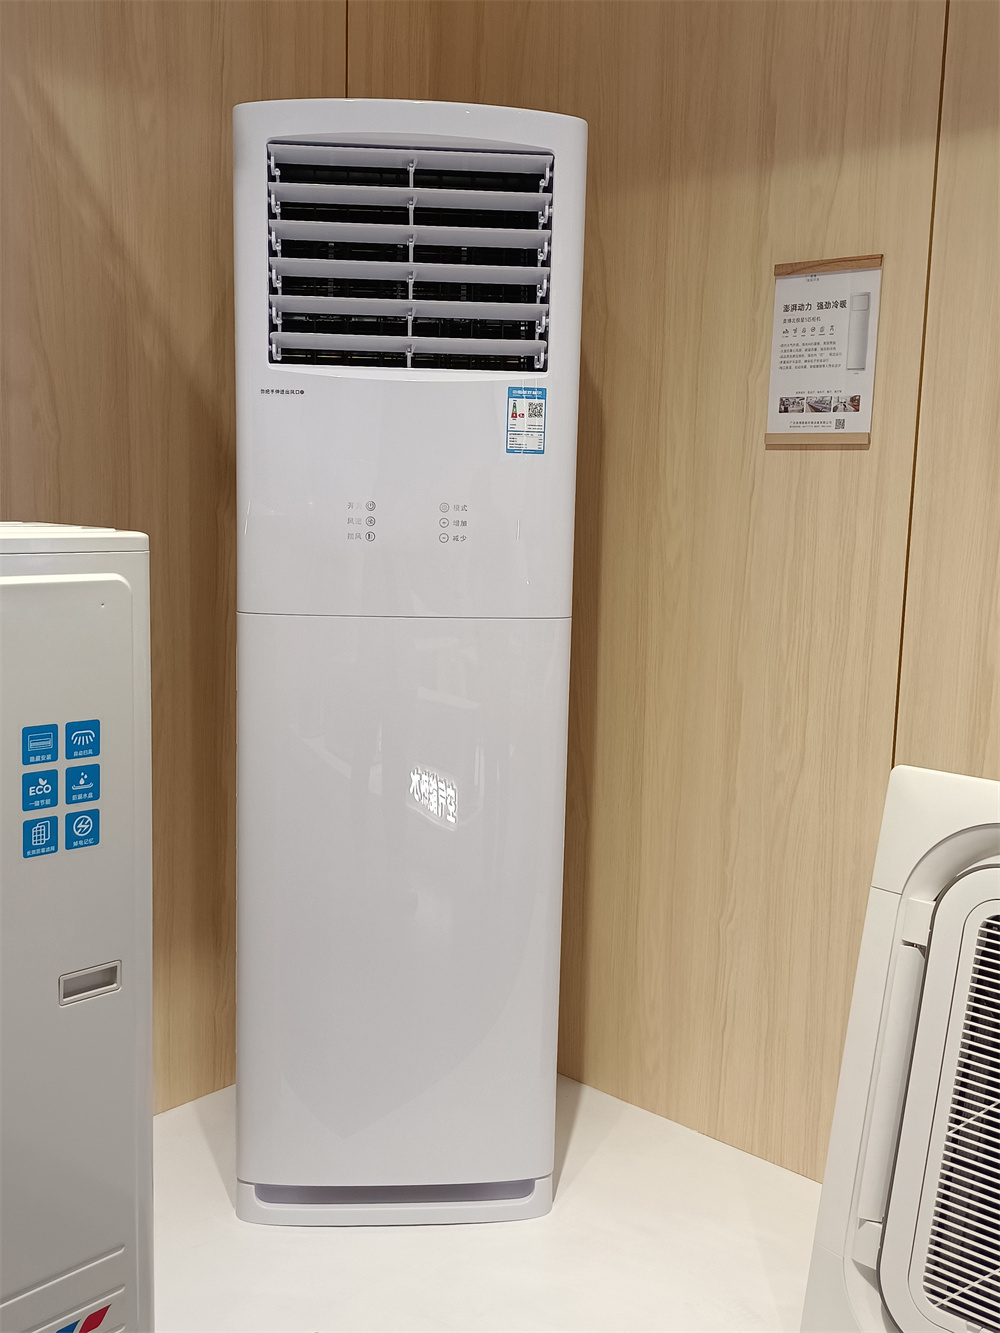 36000 Btu Home Split System T1 Working Condition Floor Standing Heating And Cooling Split Air Conditioning